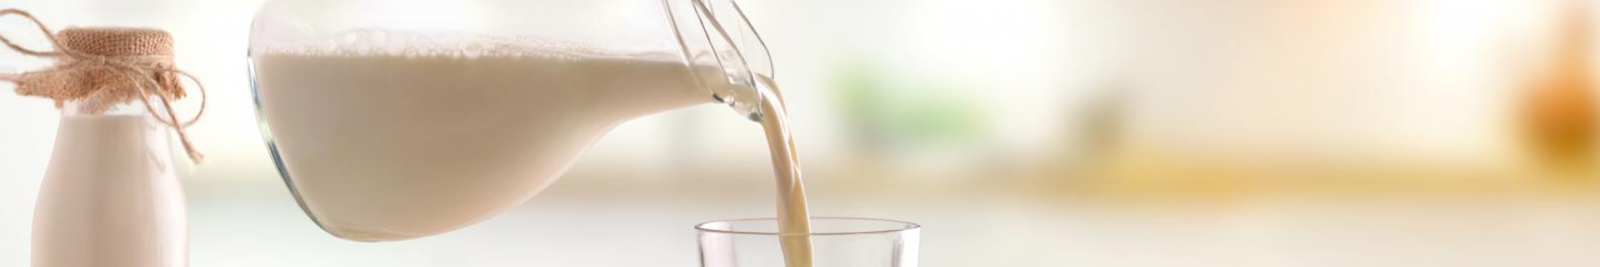 image of milk pouring into glass